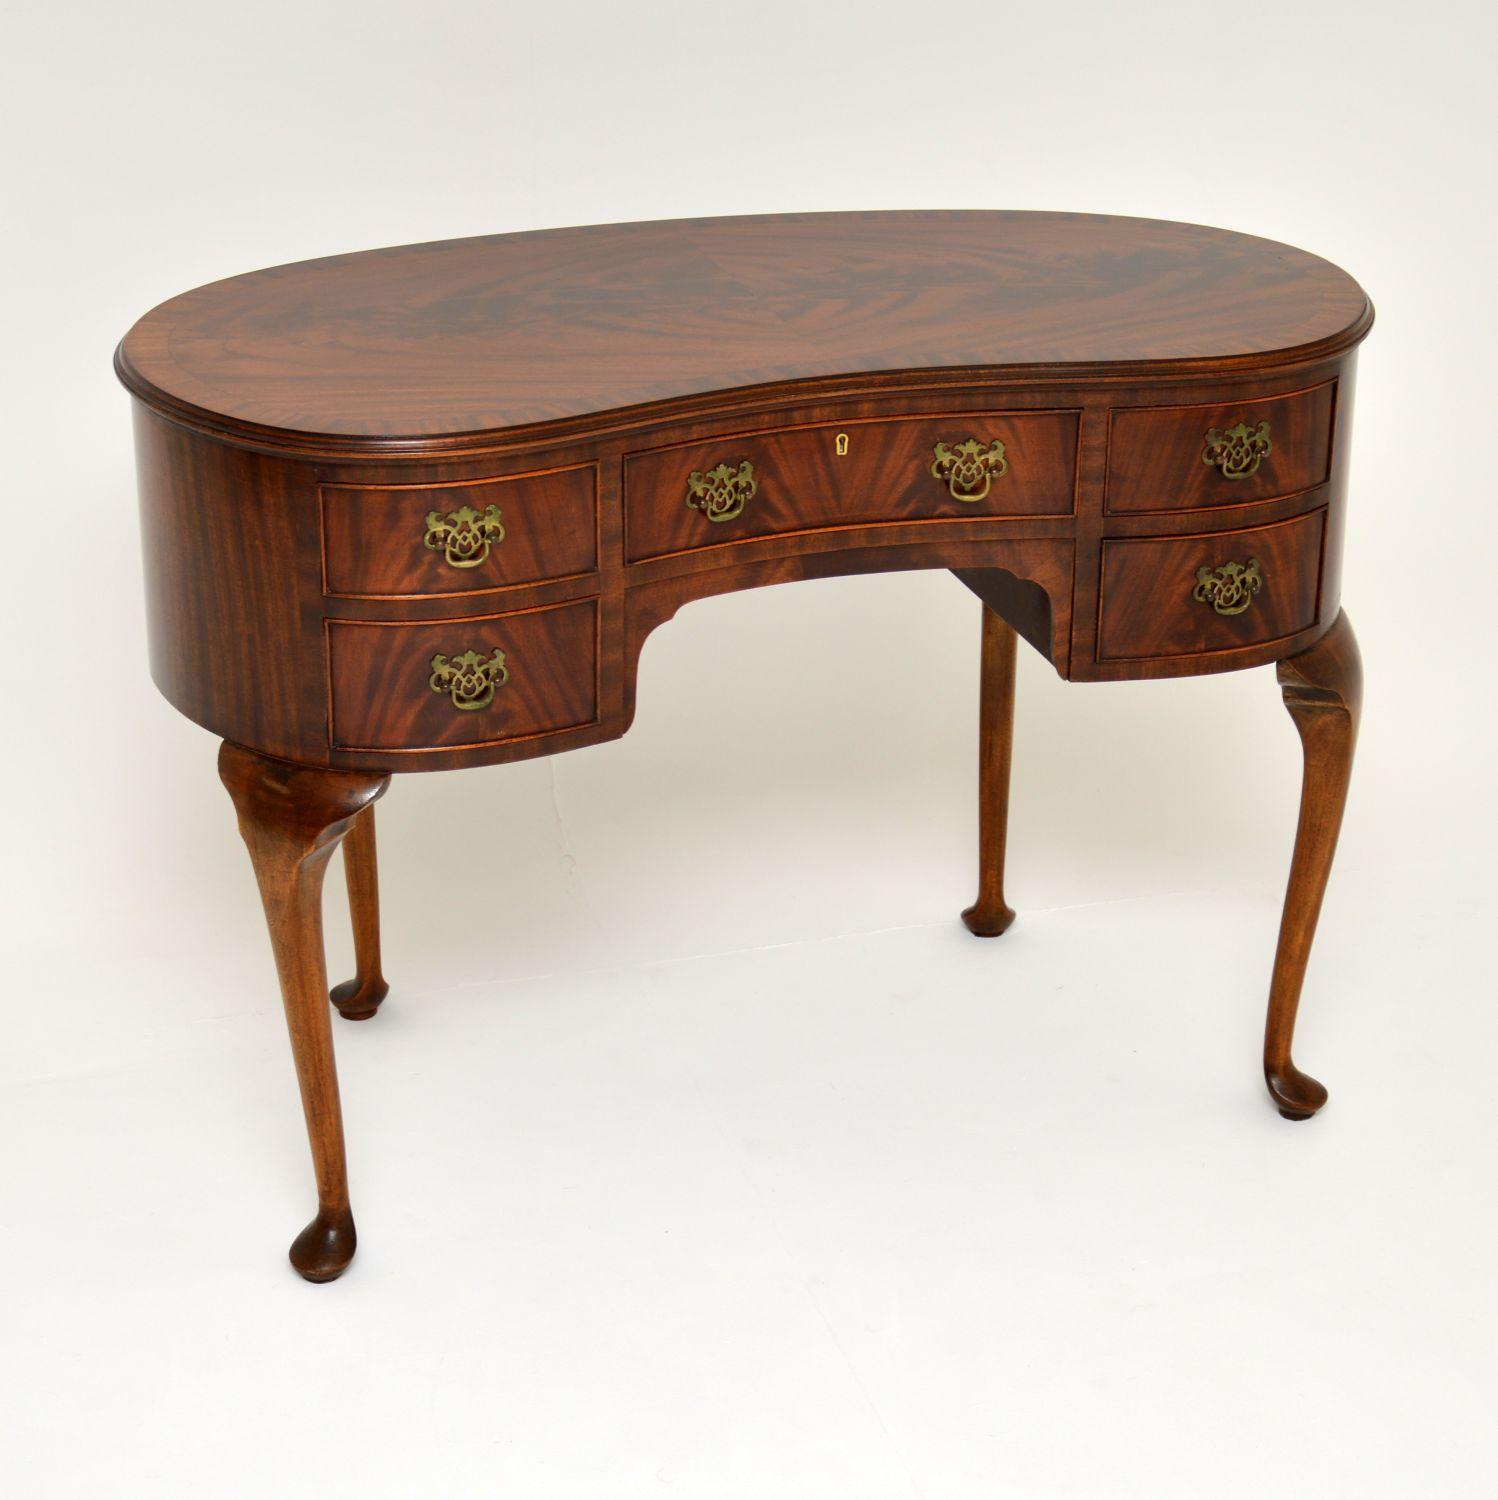 A lovely and top quality antique flame mahogany kidney shaped desk or dressing table. This dates from circa 1920s-1930s period.

It is extremely well made, with stunning flame mahogany veneers and a solid mahogany construction. The brass handles